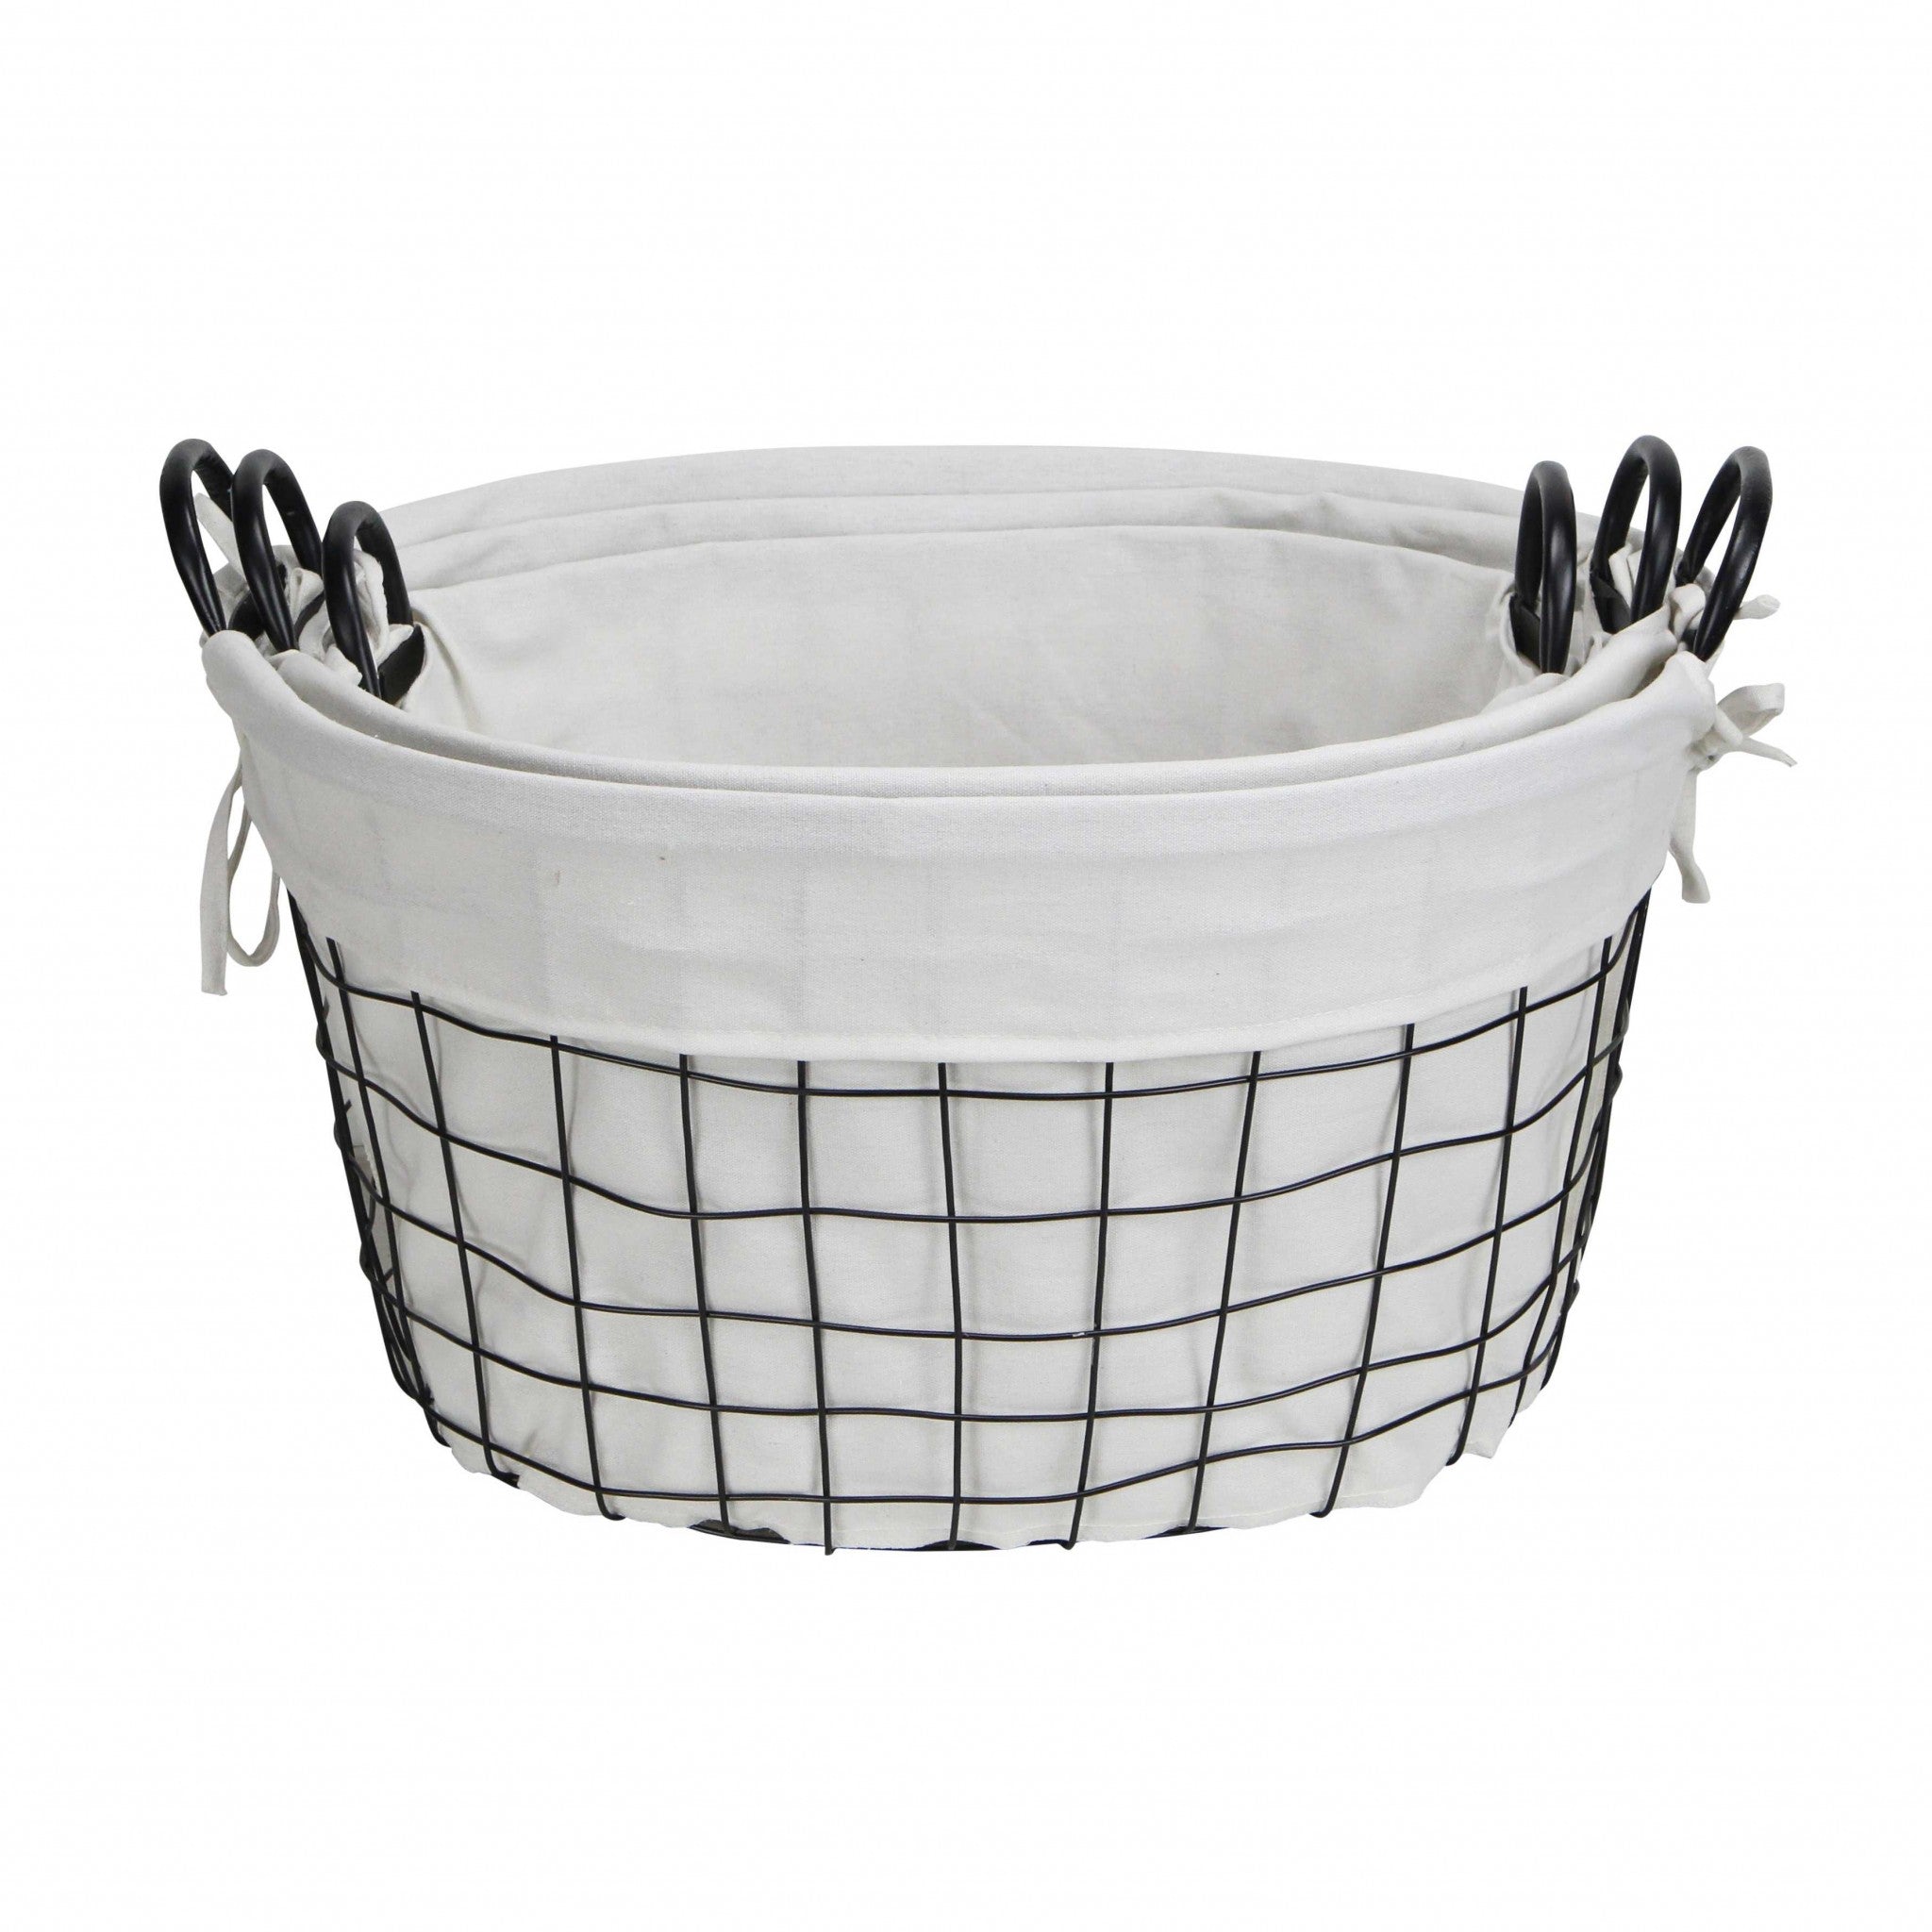 Set Of Three Black Oval Wire Baskets with White Fabric Liners and Handles